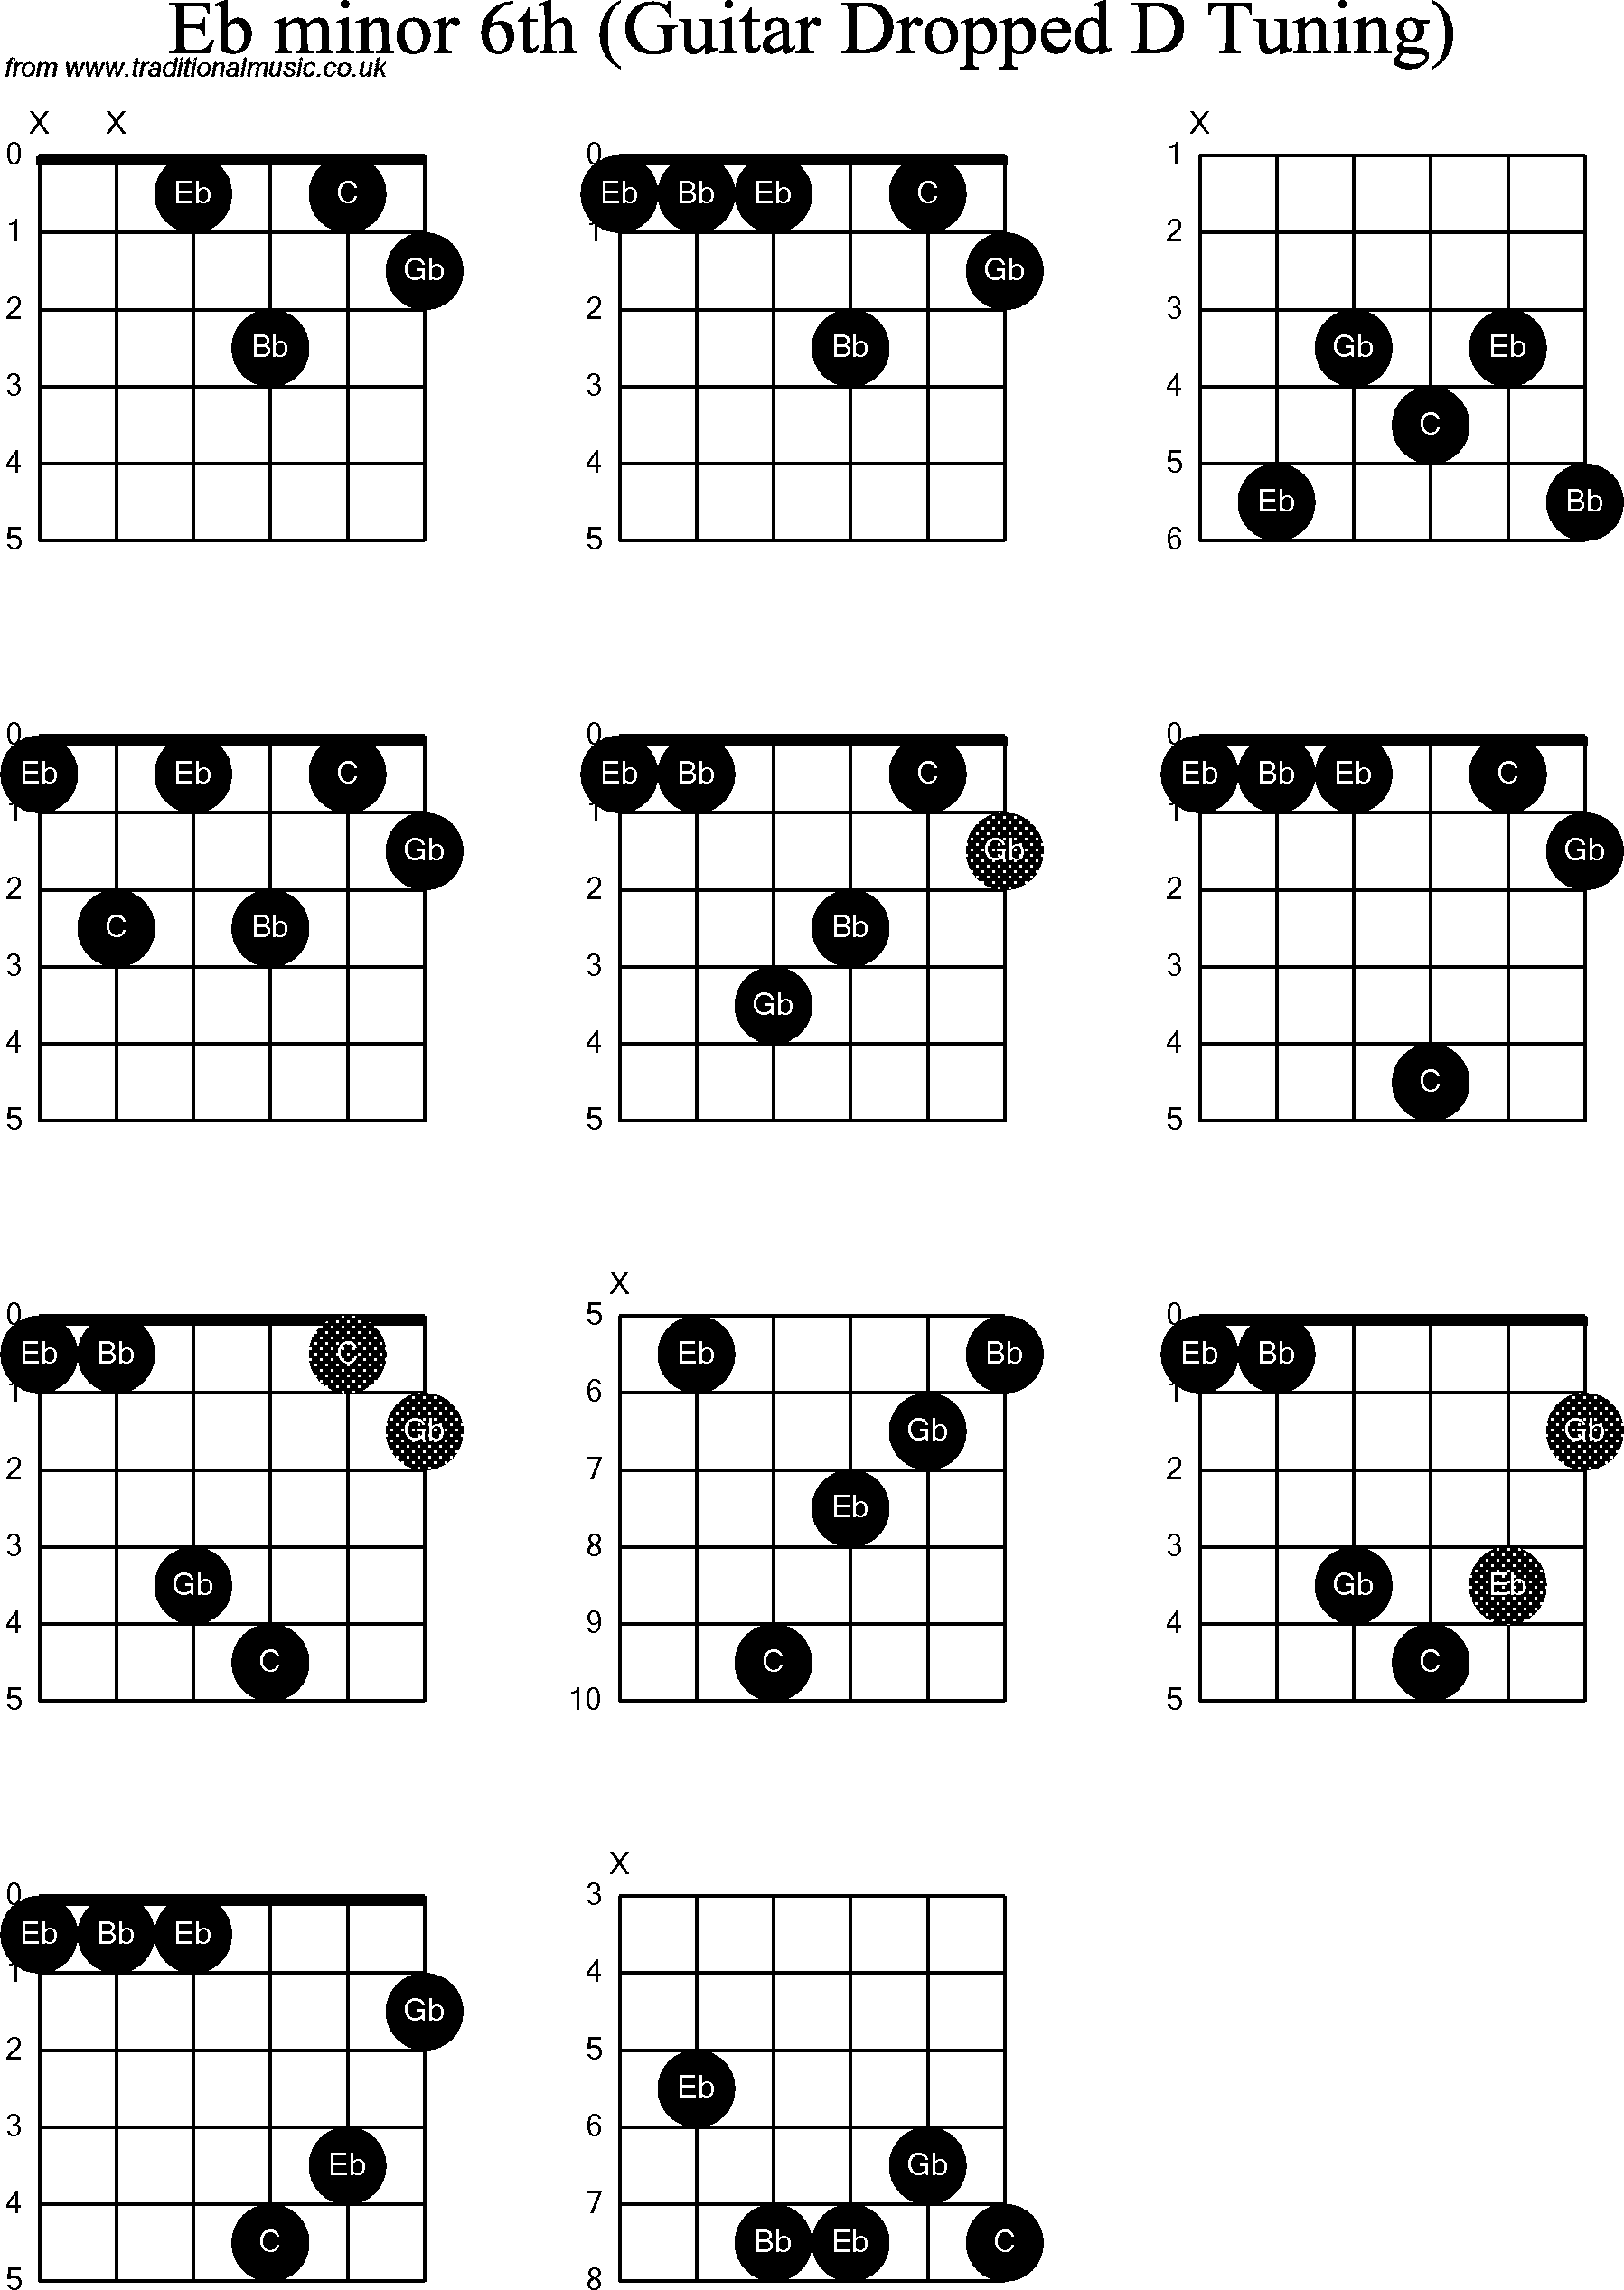 Chord diagrams for dropped D Guitar(DADGBE), Eb Minor6th